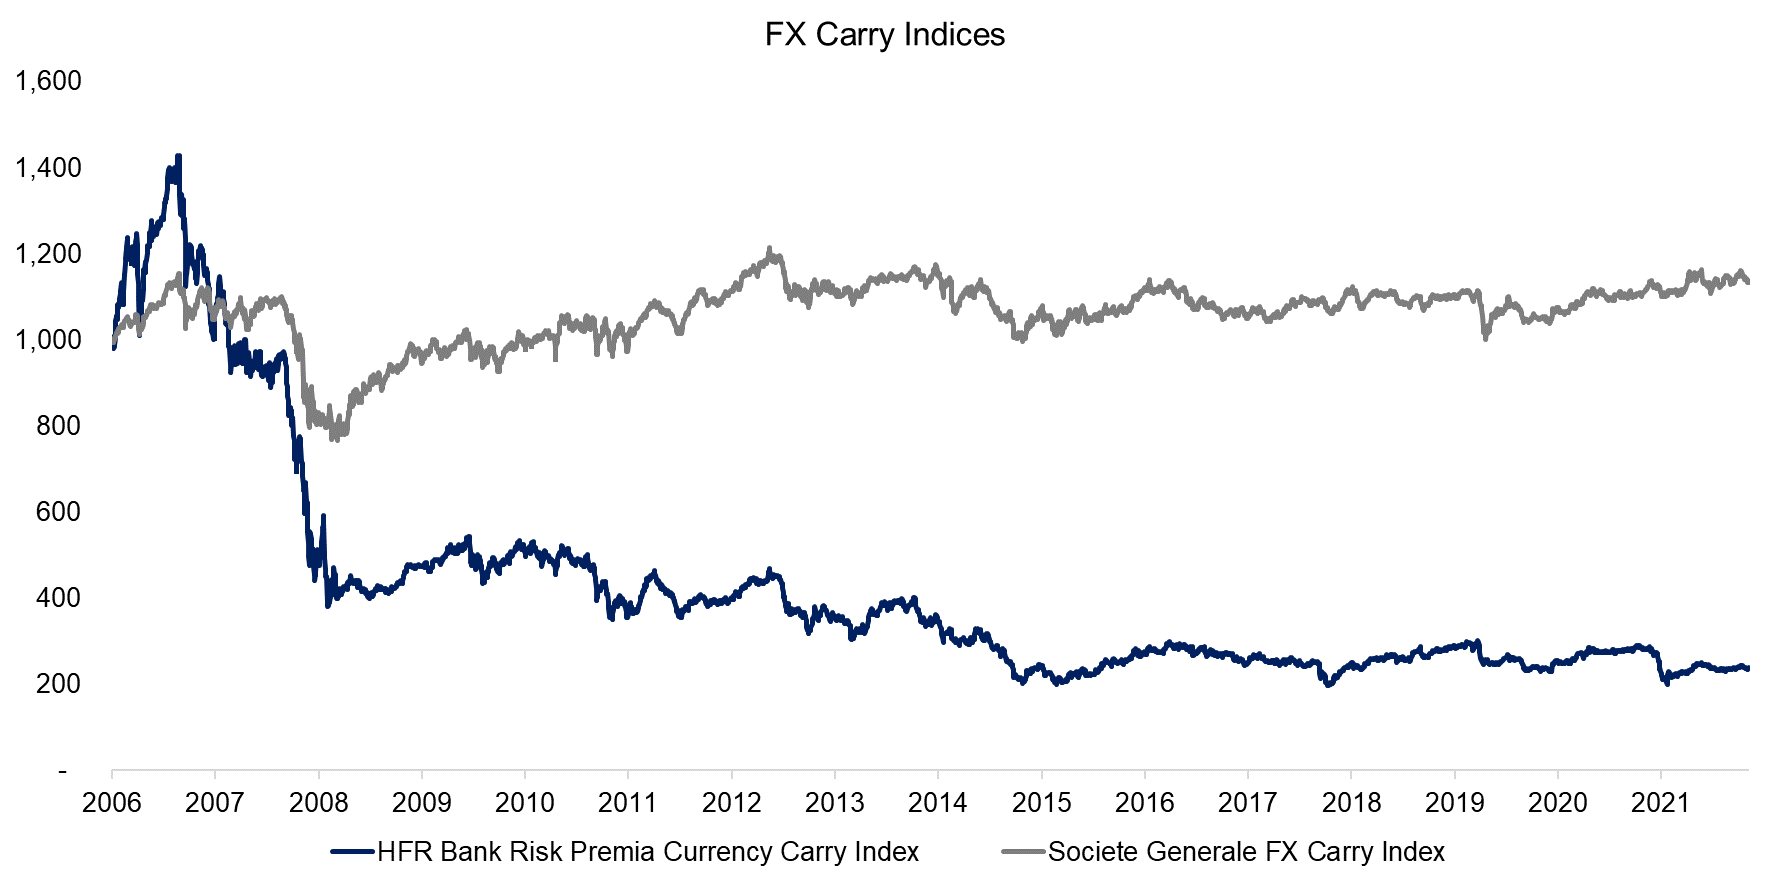 FX Carry Indices